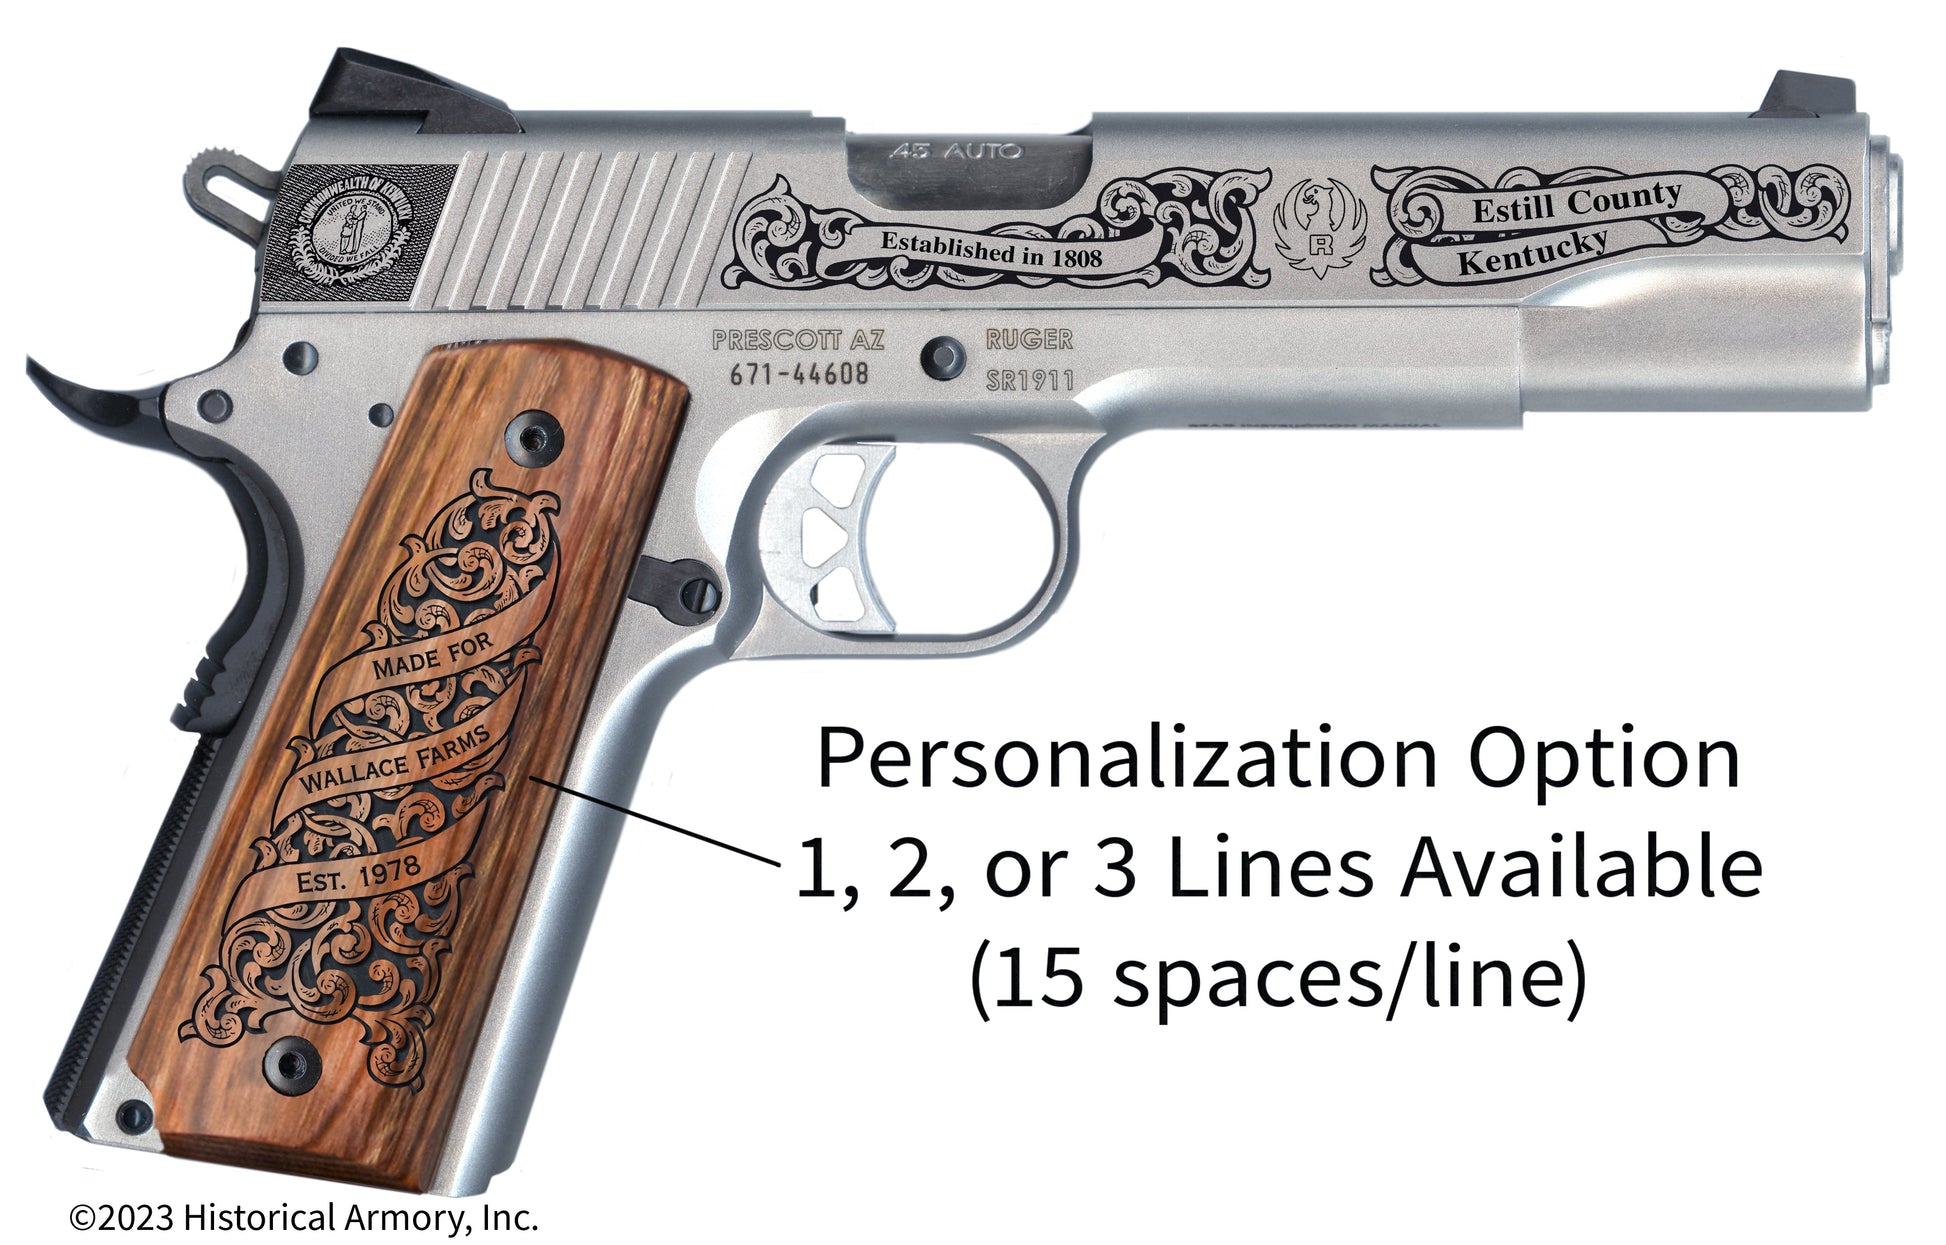 Estill County Kentucky Personalized Engraved .45 Auto Ruger 1911